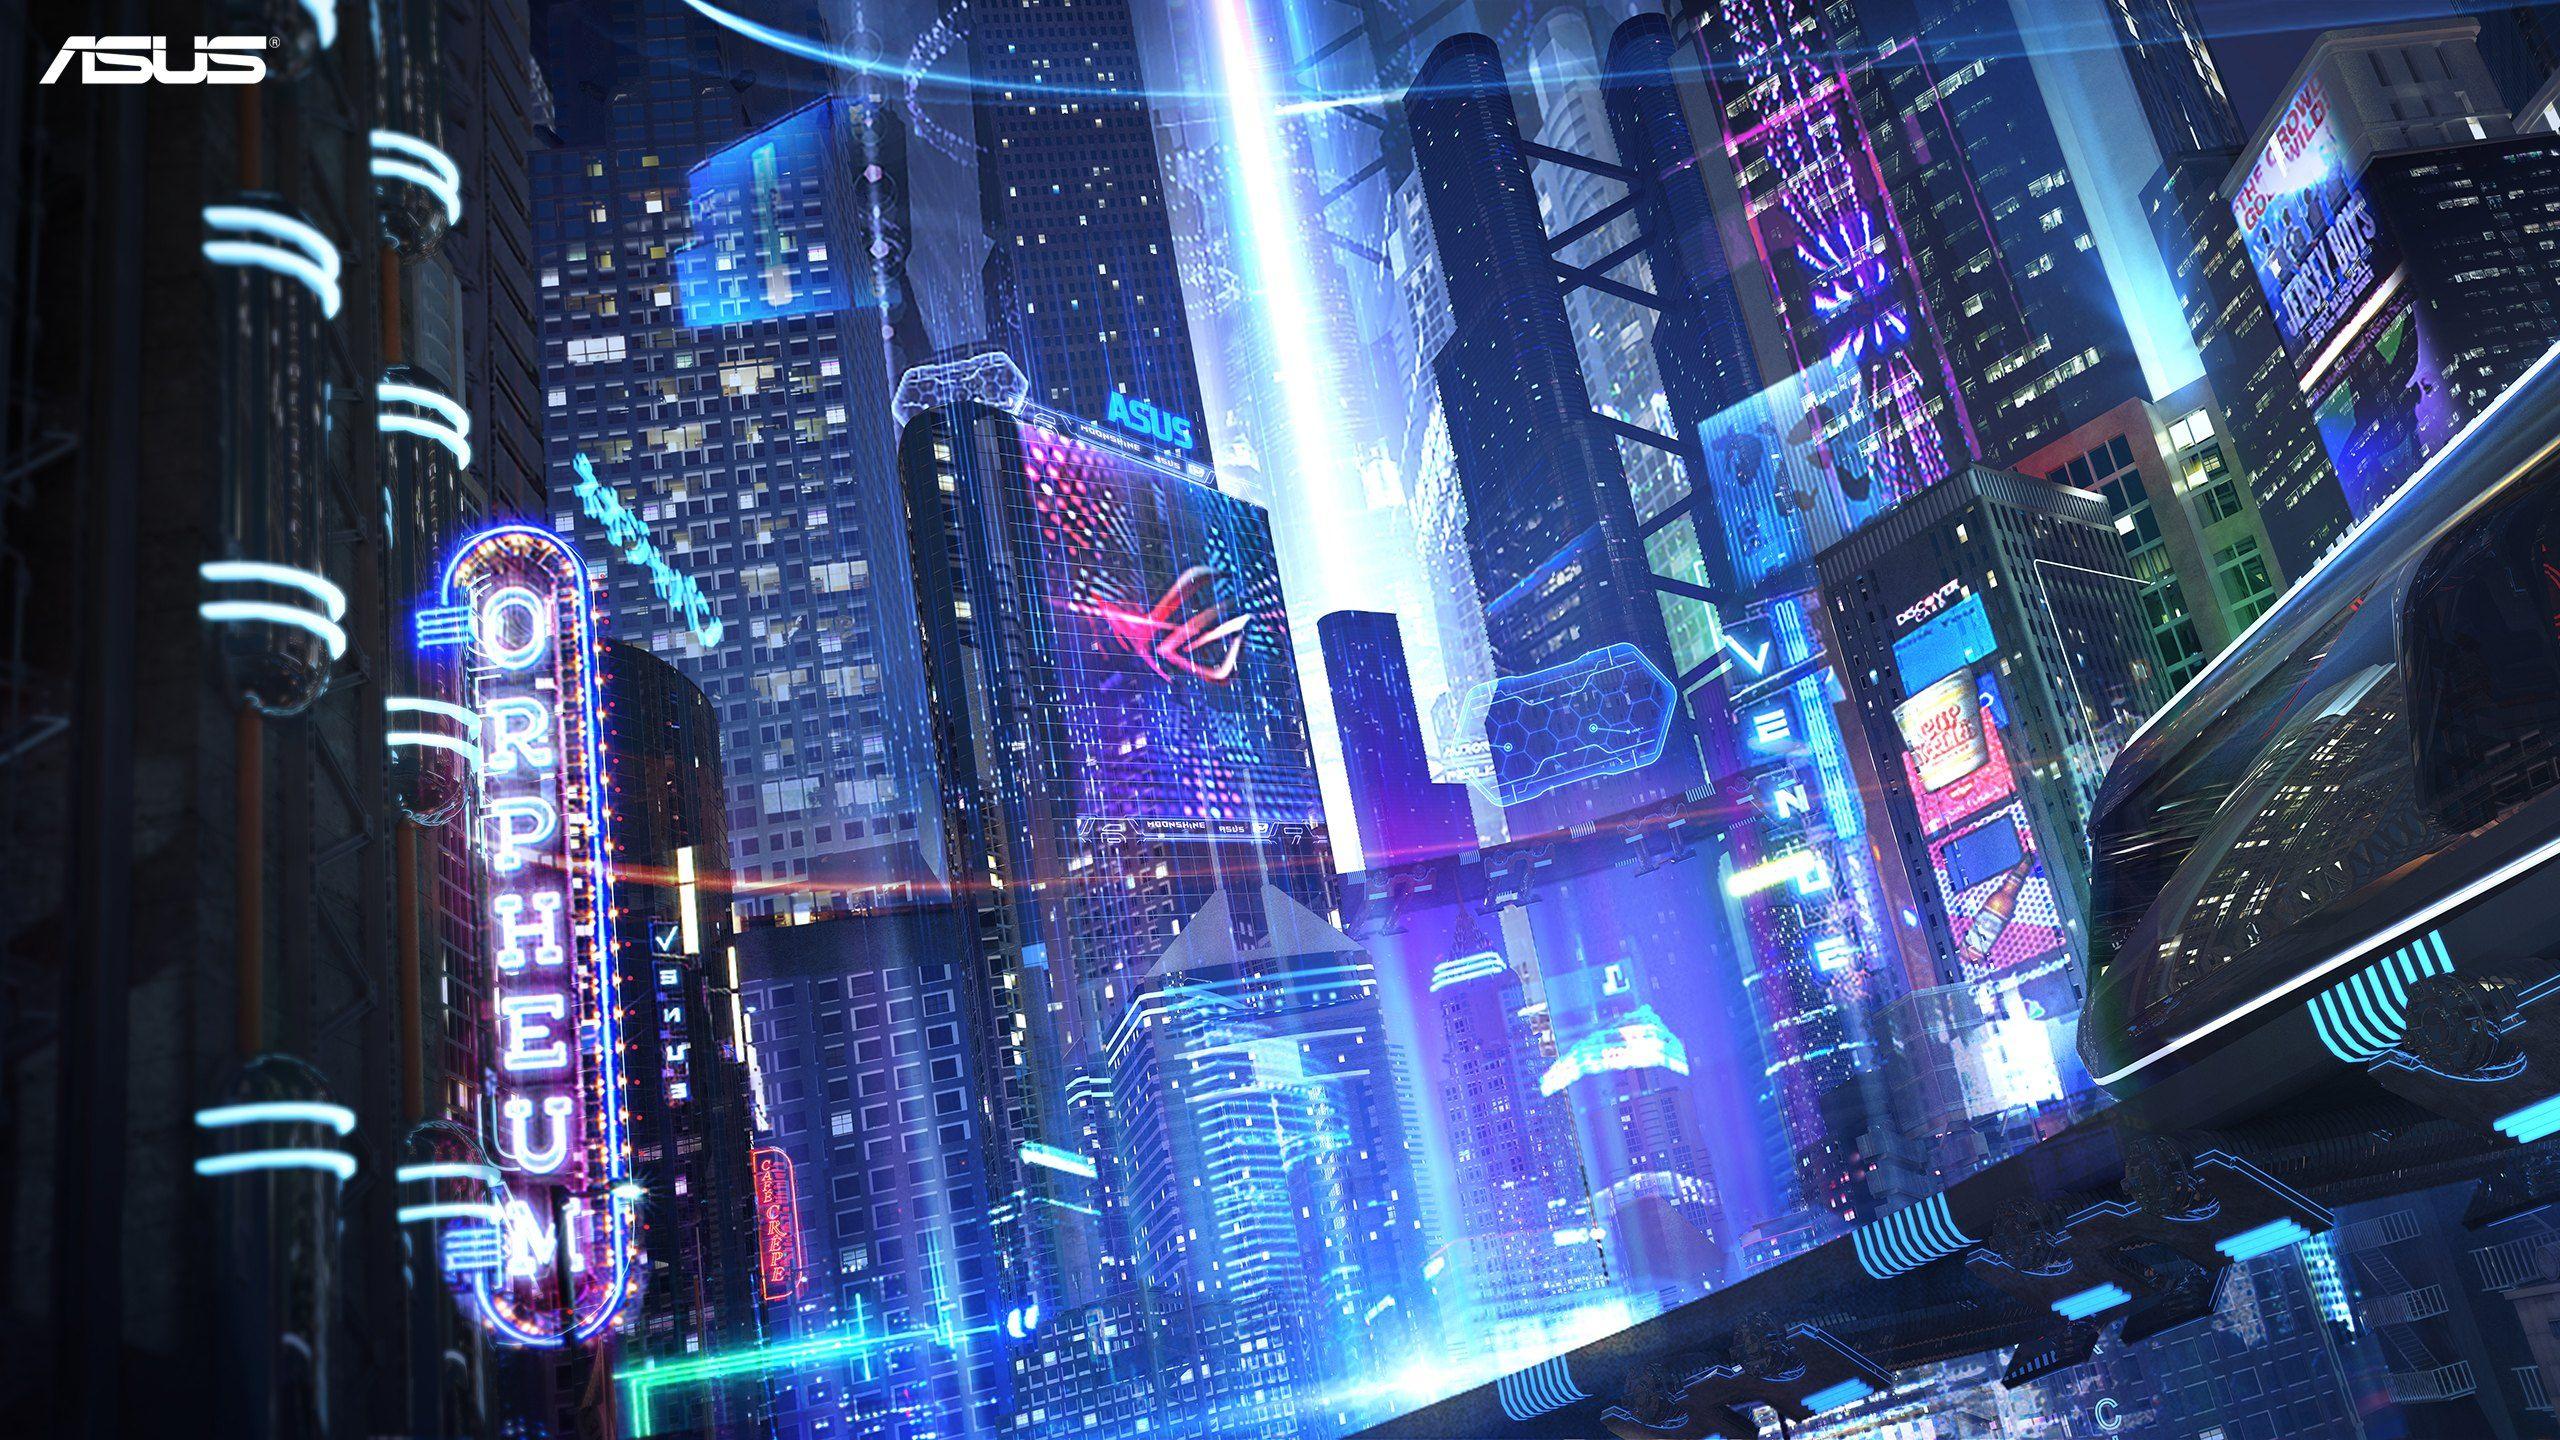 Cyber City Wallpapers Top Free Cyber City Backgrounds WallpaperAccess